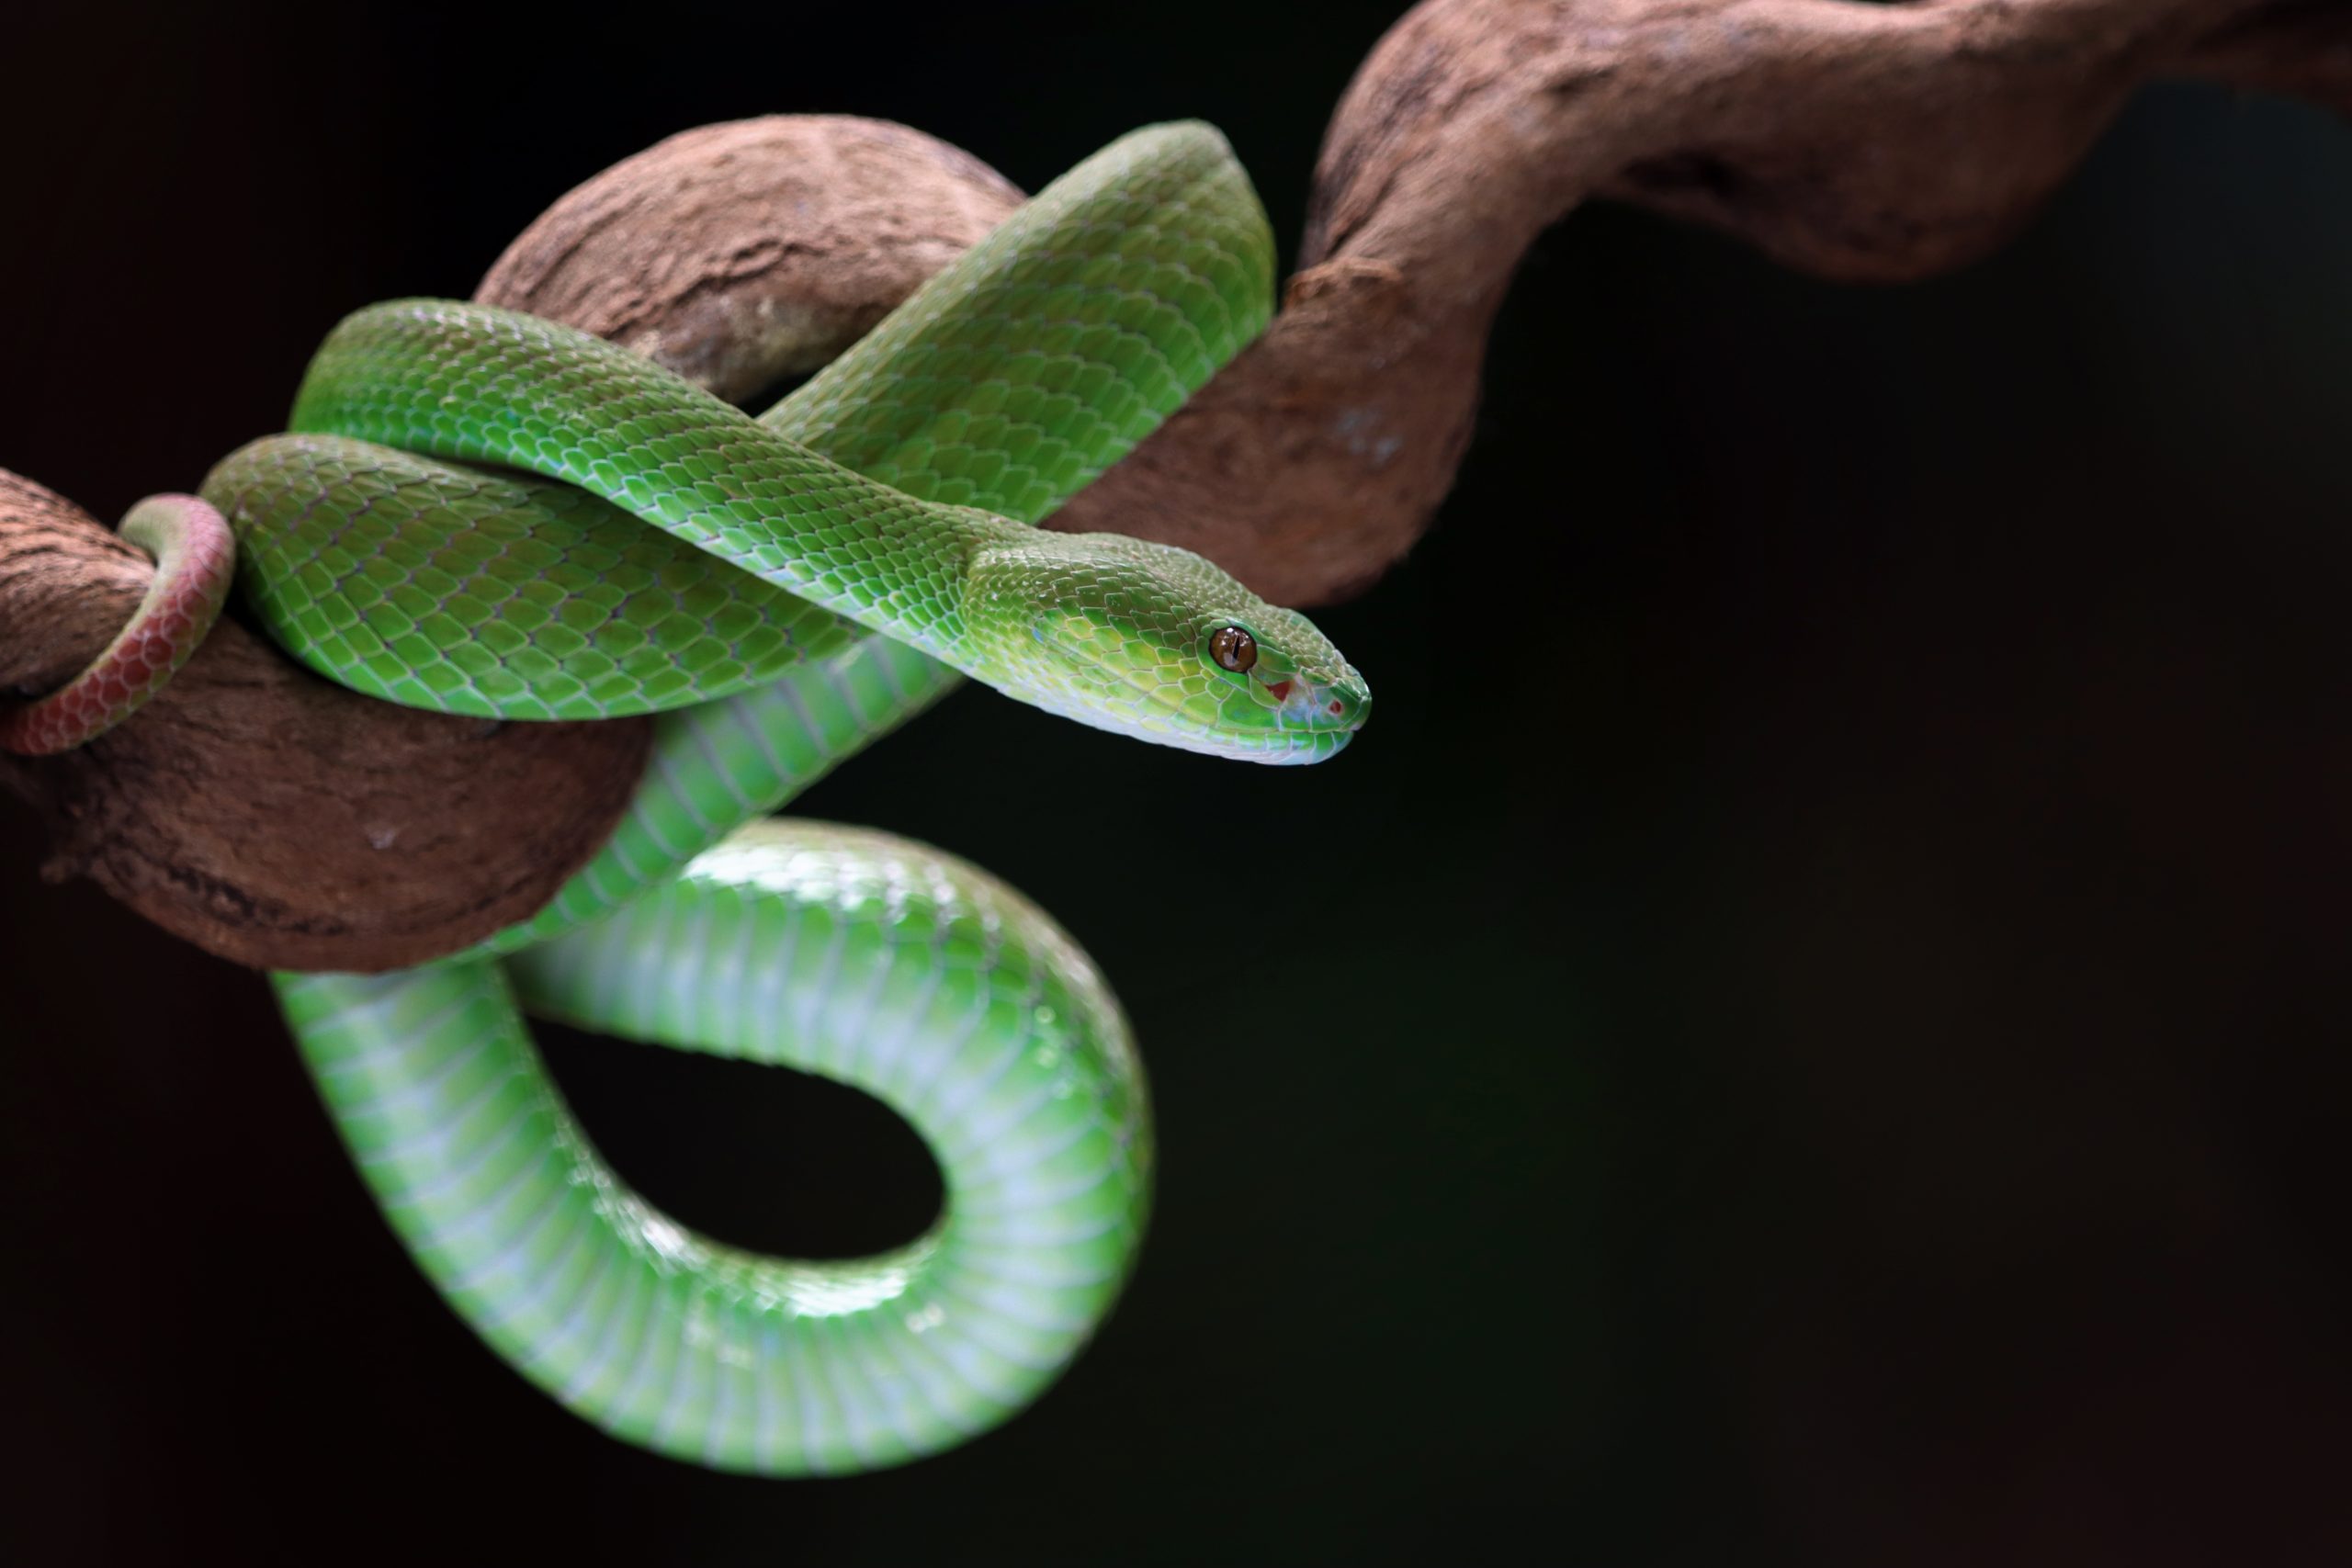 What happens if you get bit by a green tree python?